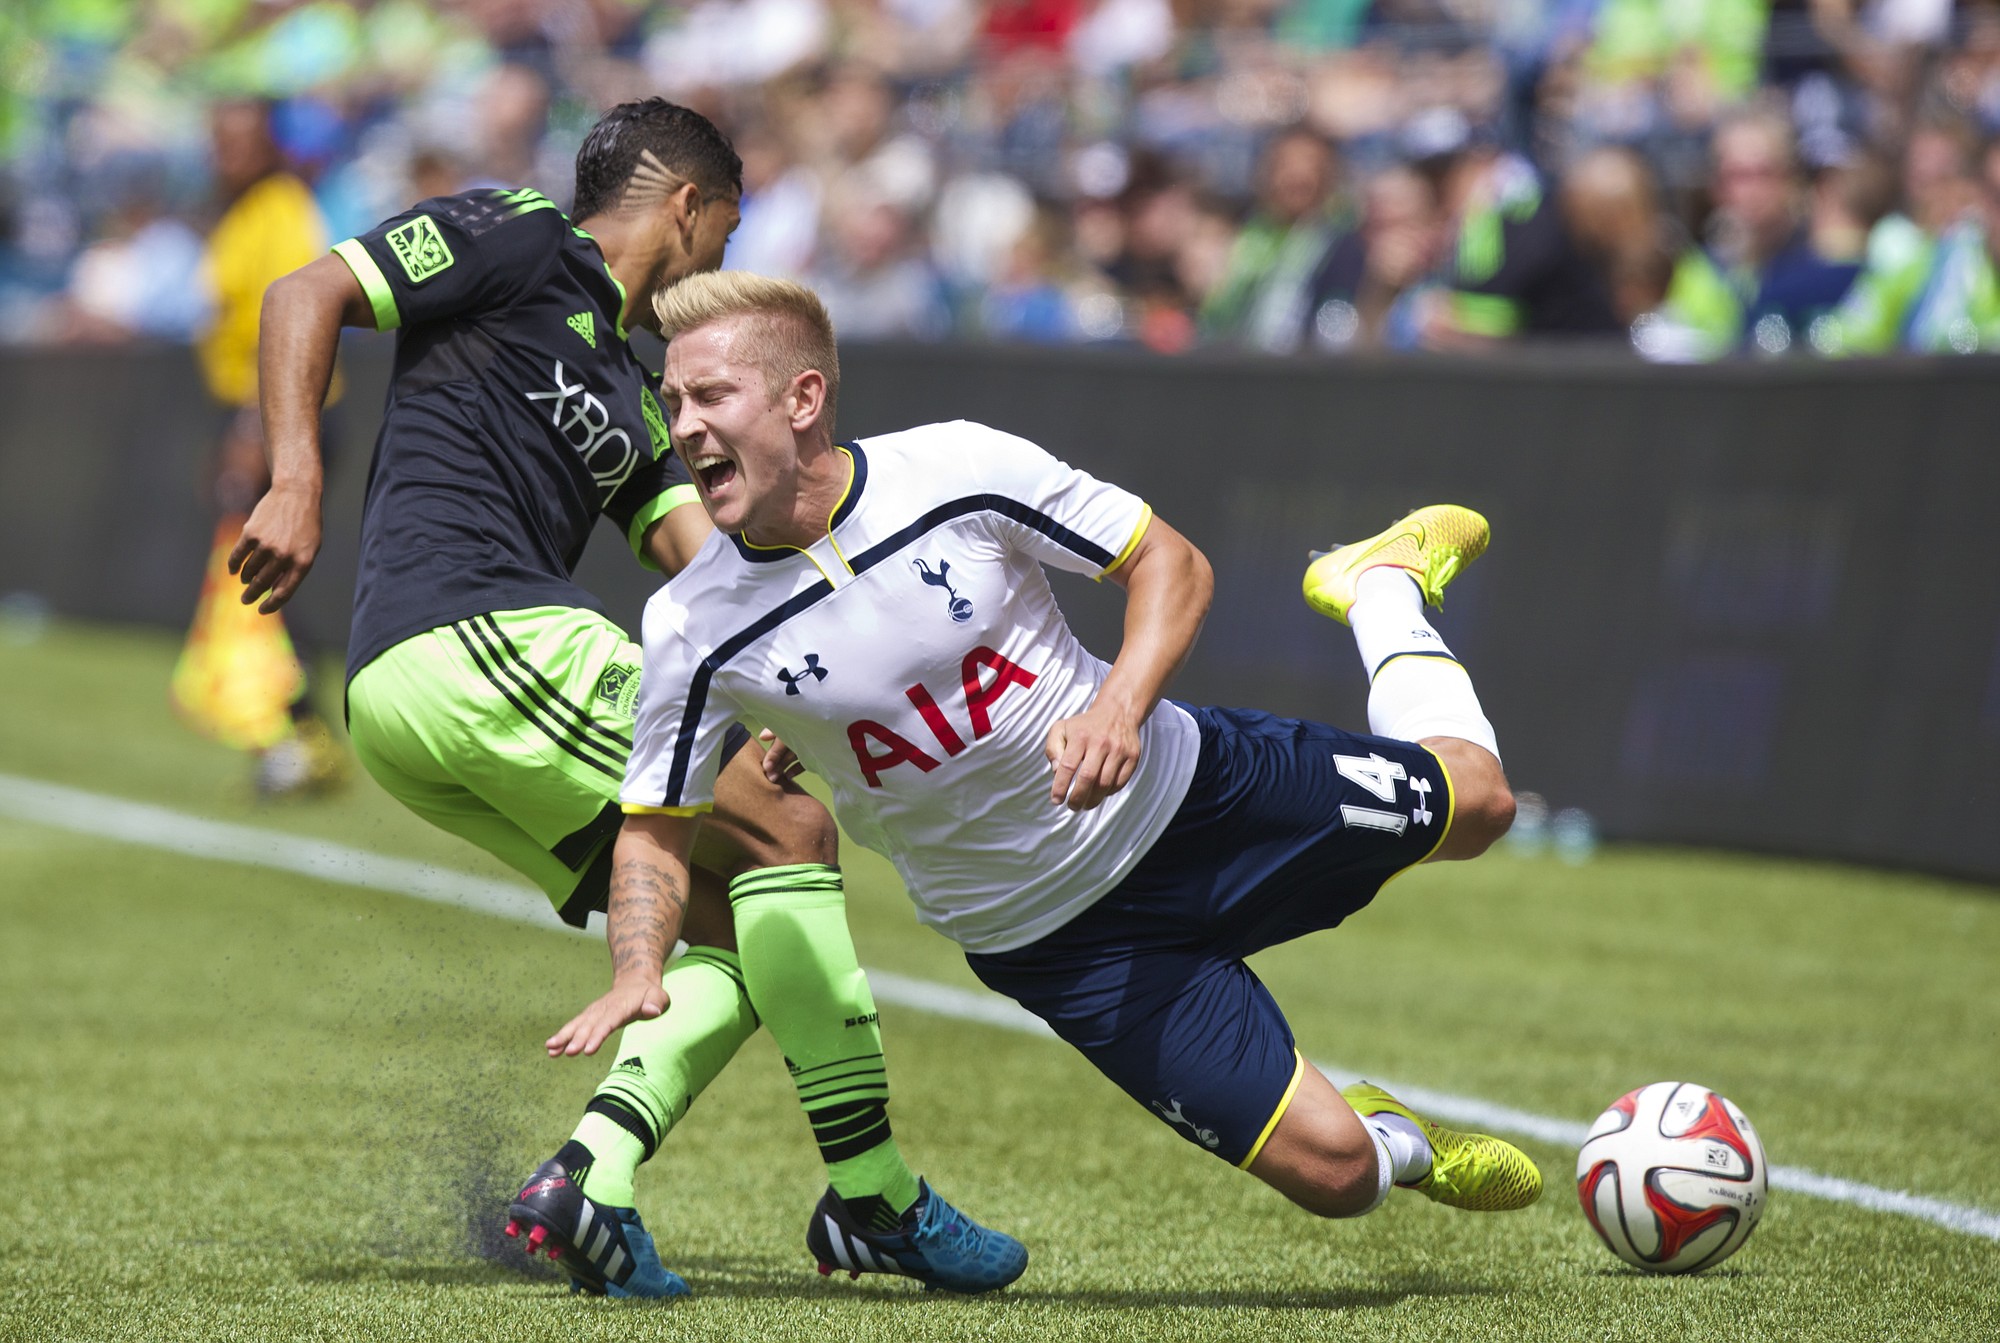 Tottenham Hotspur's Lewis Holtby (14) is tackled by Seattle Sounders' DeAndre Yedlin during the first half of a soccer match Saturday in Seattle.